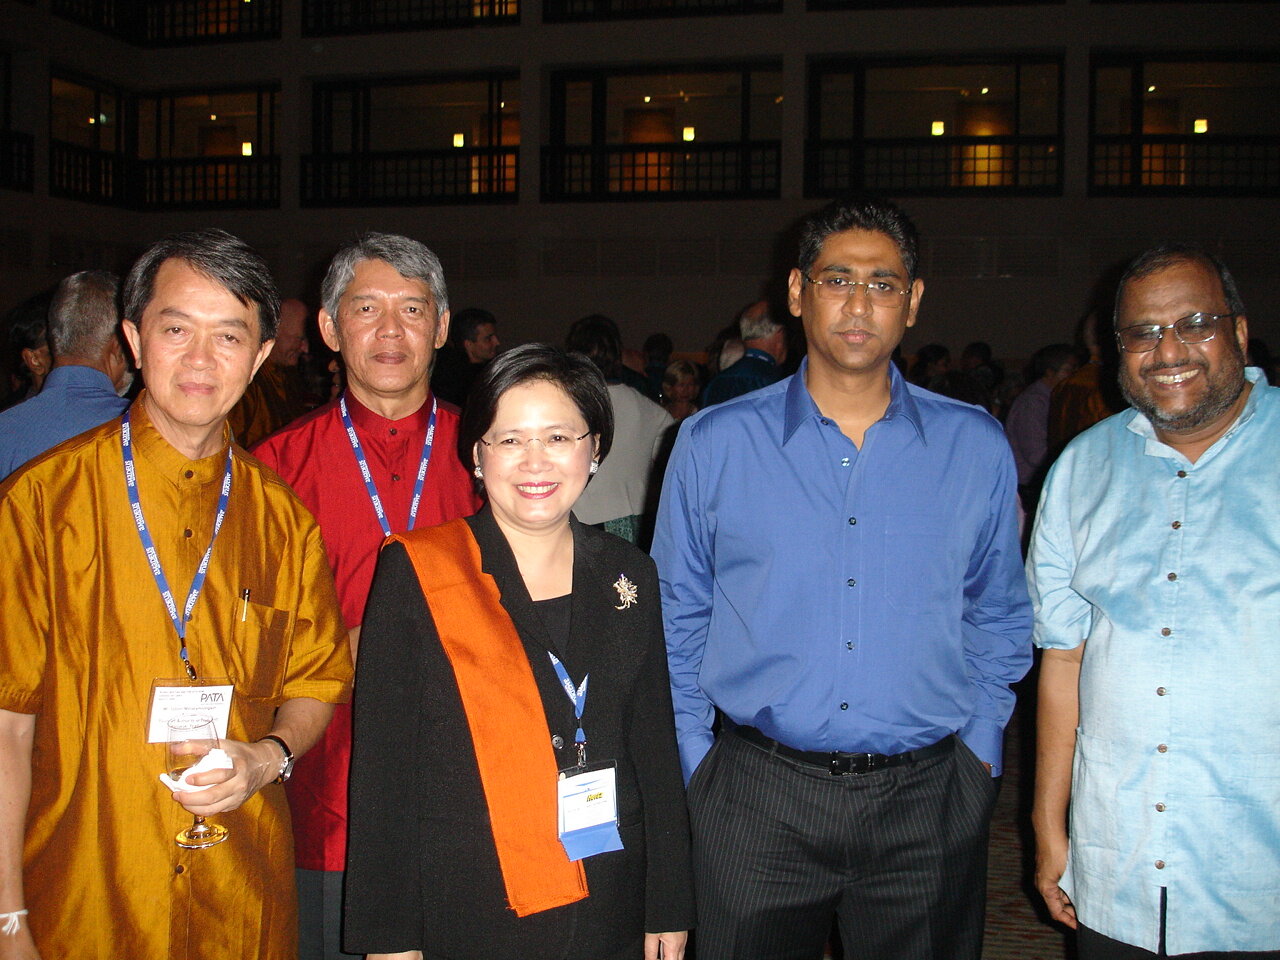 Phornsiri Manoharn with the Tourism Authority of Thailand officials and the Ministry of Tourism, Sri Lanka officials